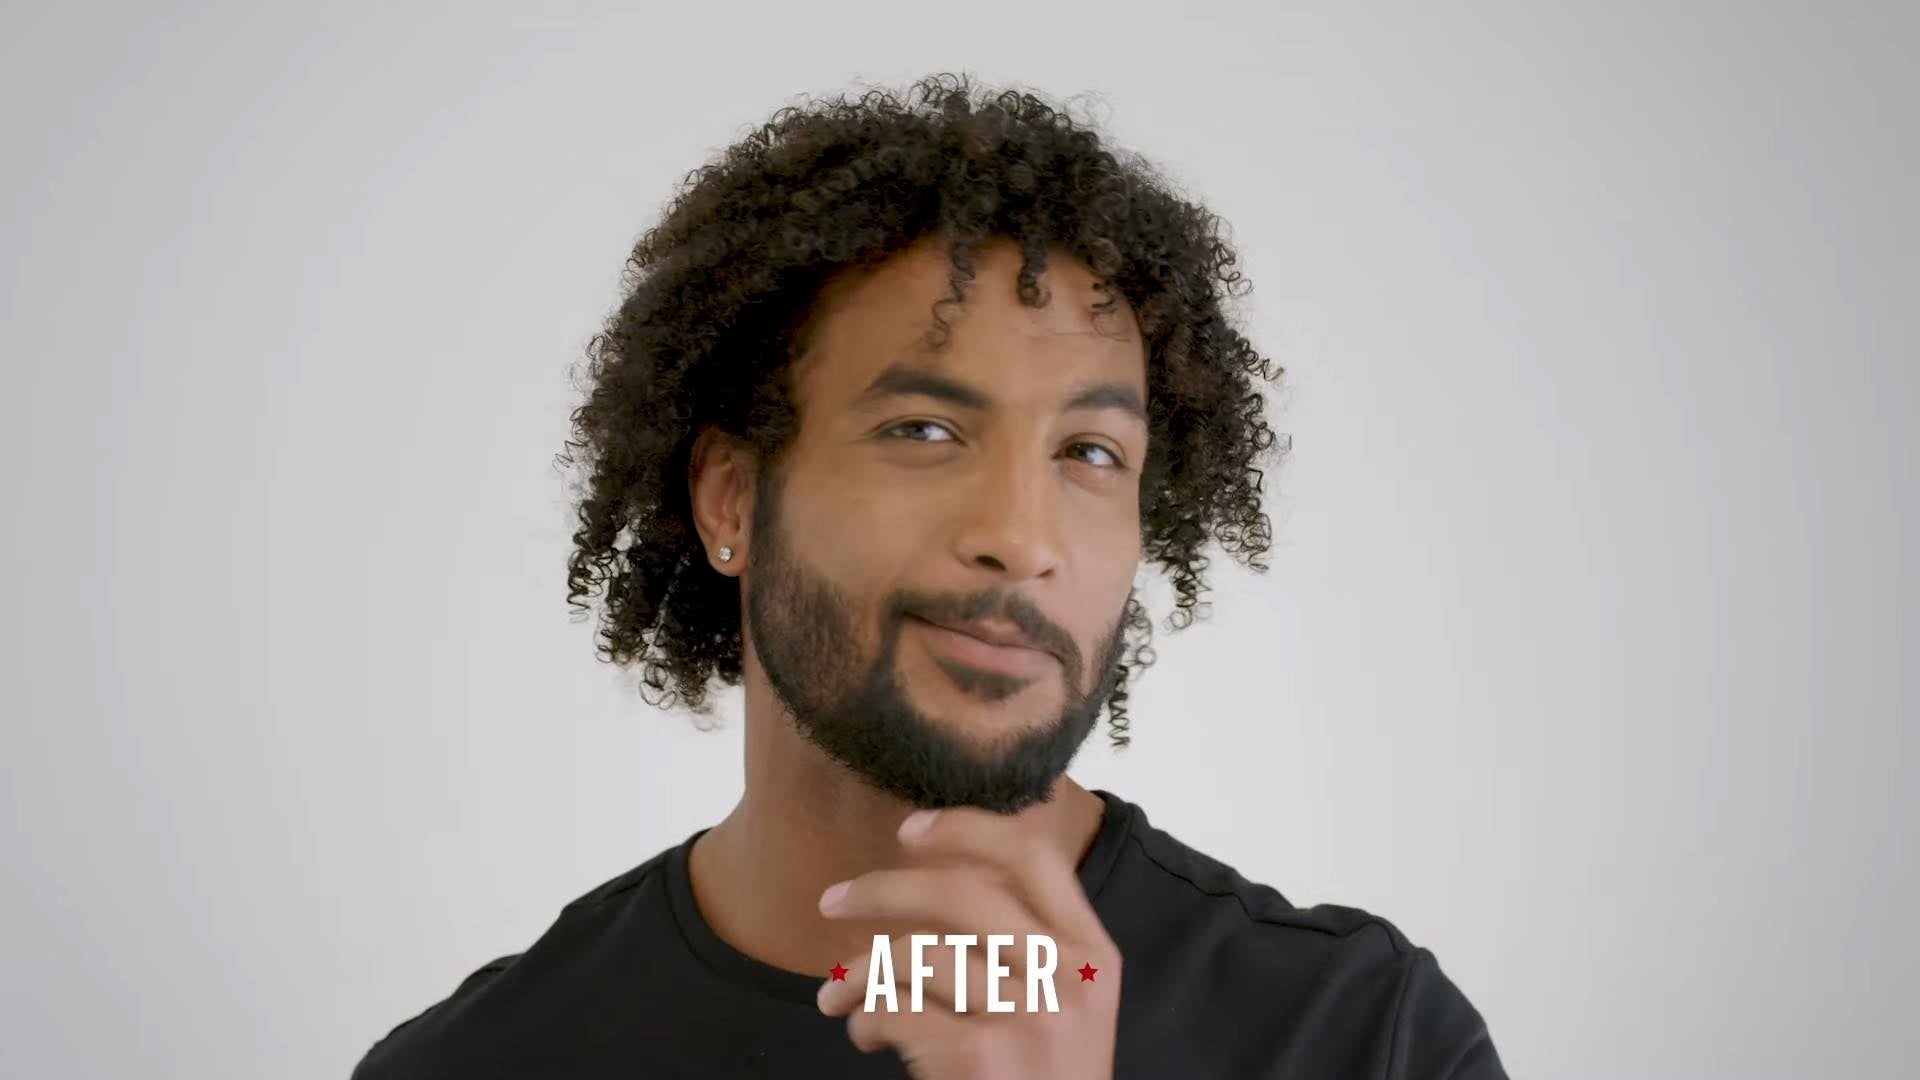 after trimming your beard shot